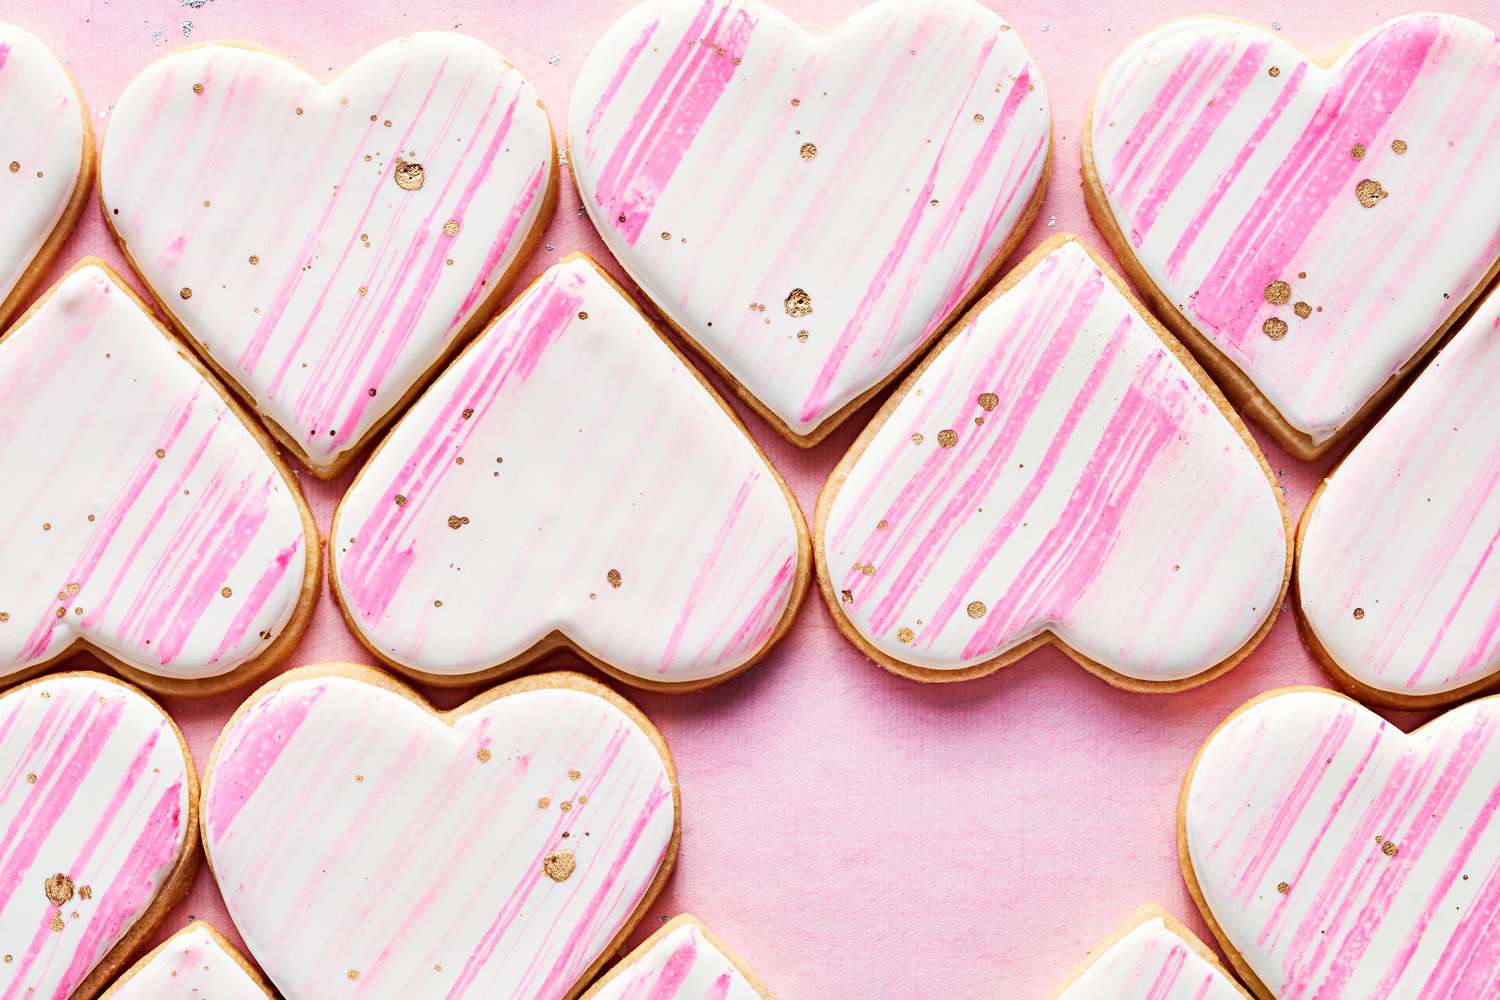 40 Valentine's Day Dessert Recipes That You'll Fall in Love With